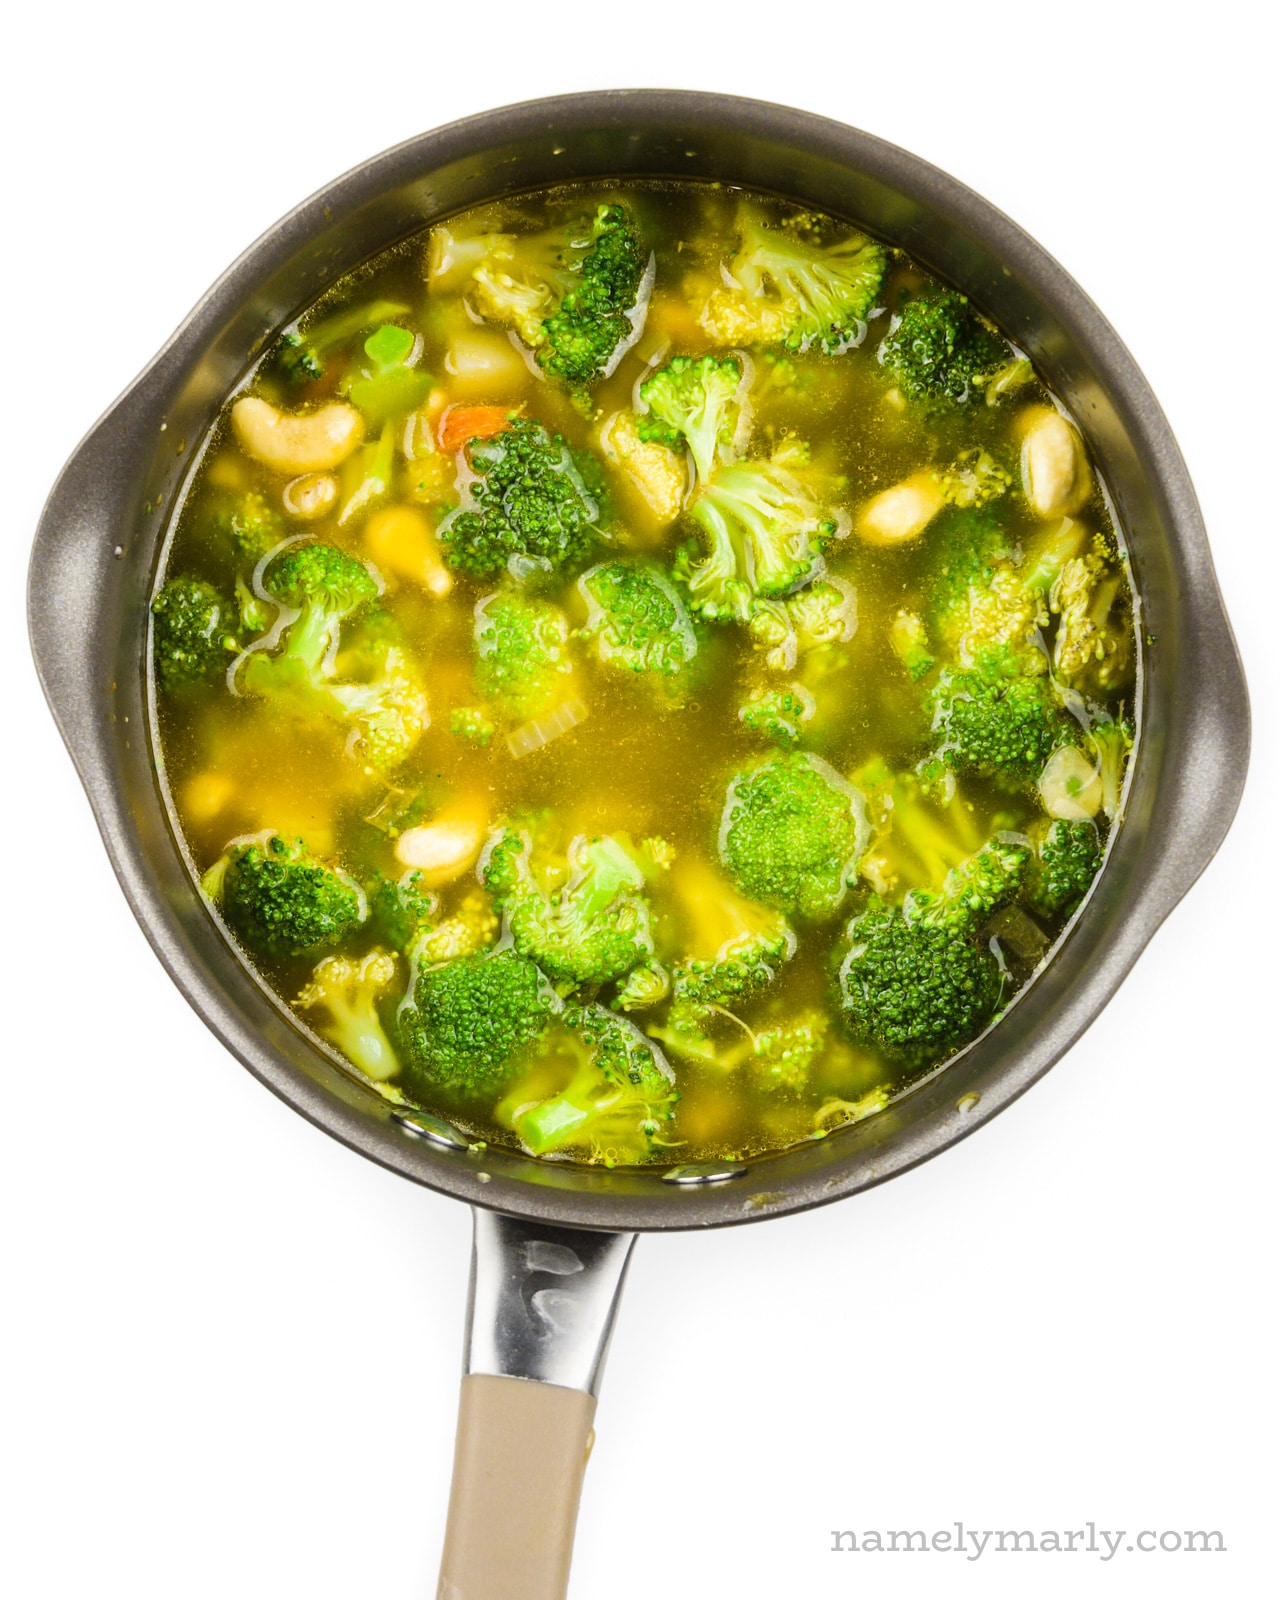 Looking down on a saucepan full of broth, cashews, broccoli, and other veggies.